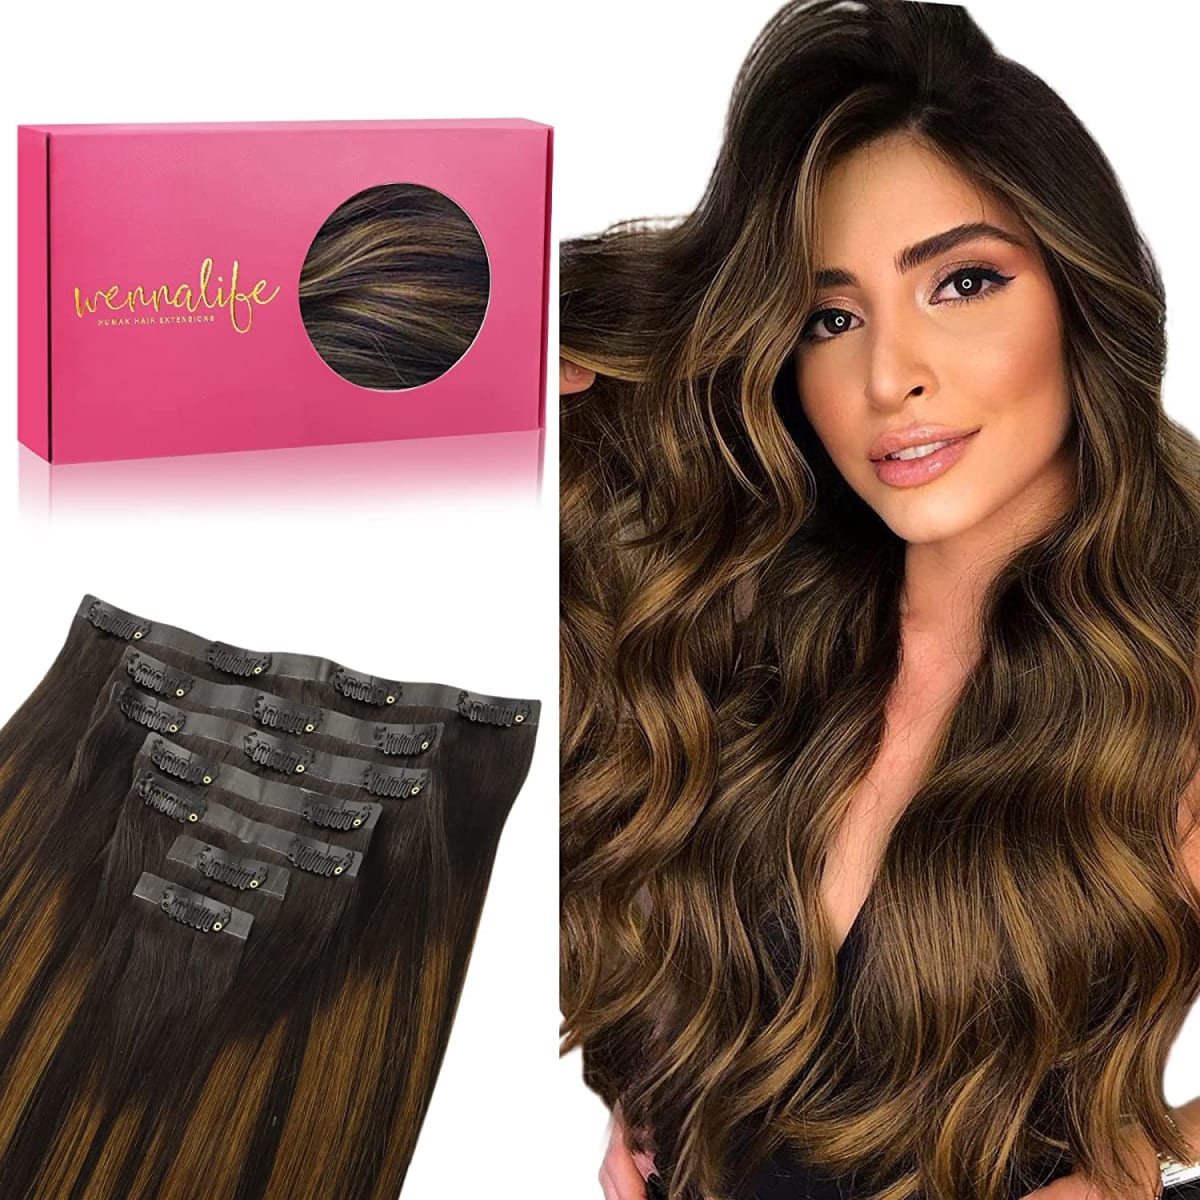 WENNALIFE Seamless Clip In Hair Extensions, 22 Inch 130g 7pcs Balayage Dark Brown to Chestnut Brown Hair Extensions Clip in Human Hair Invisible PU Skin Weft Natural Remy Human Hair Extensions